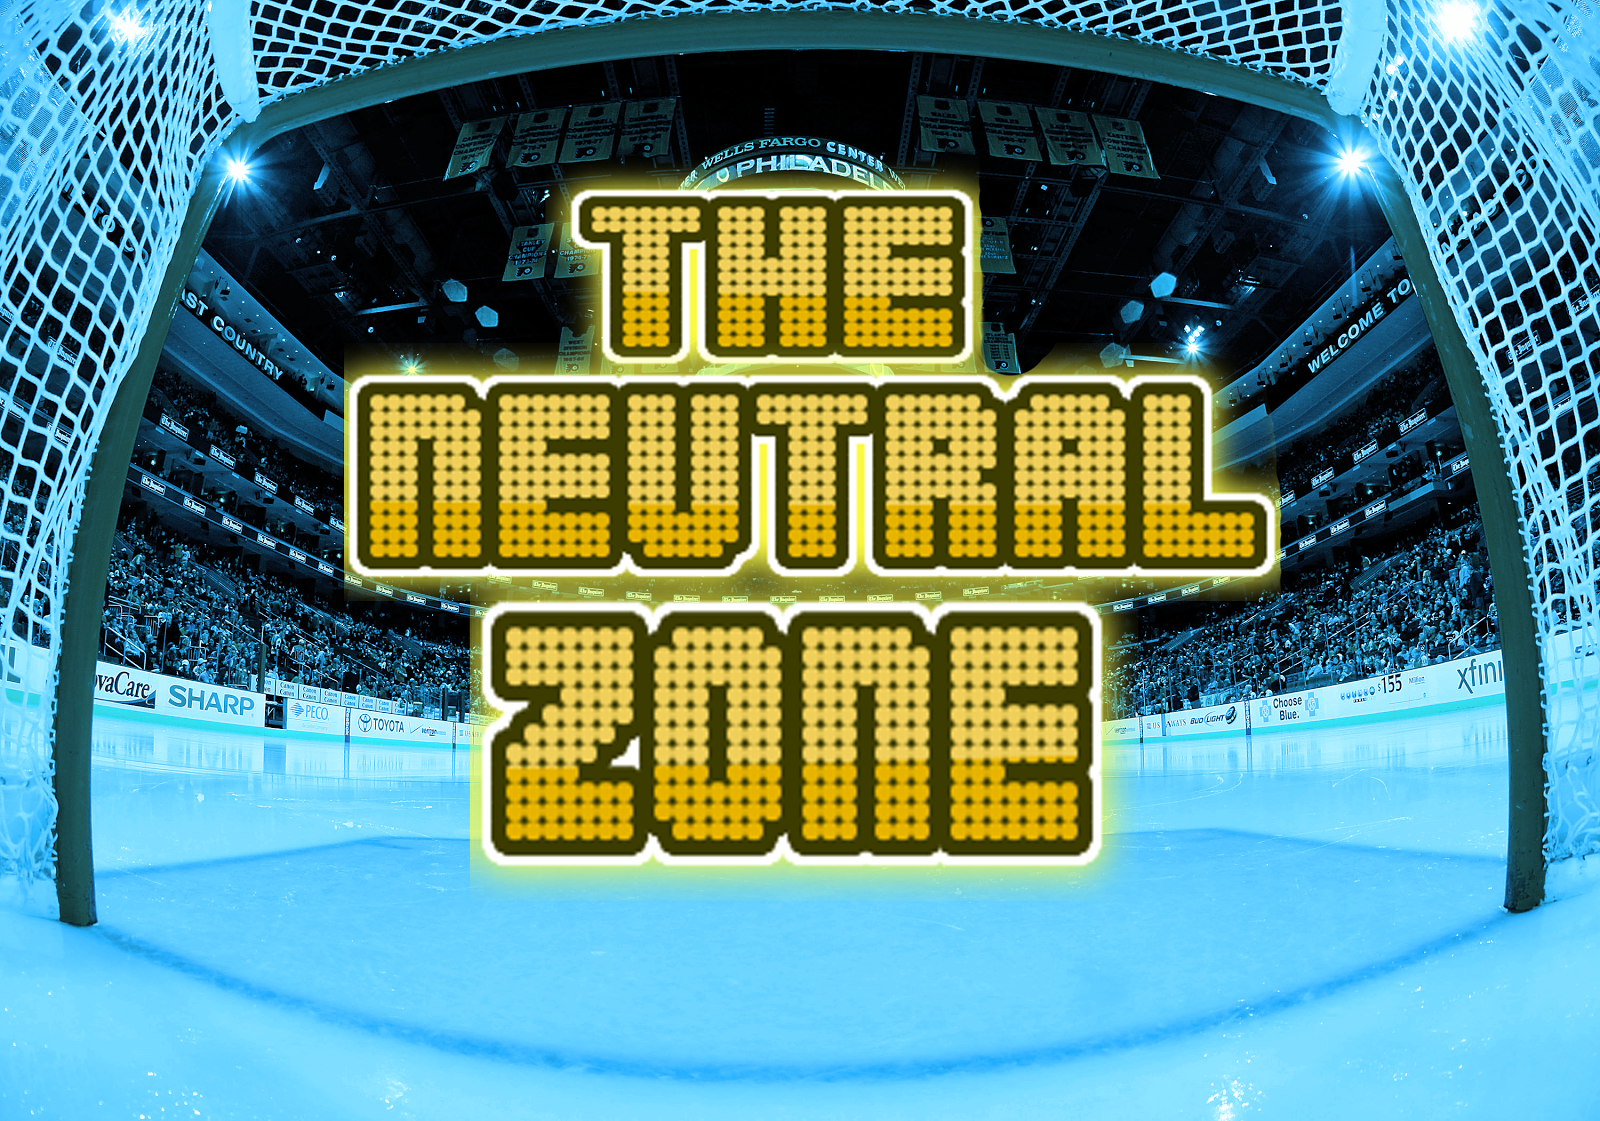 The Neutral Zone